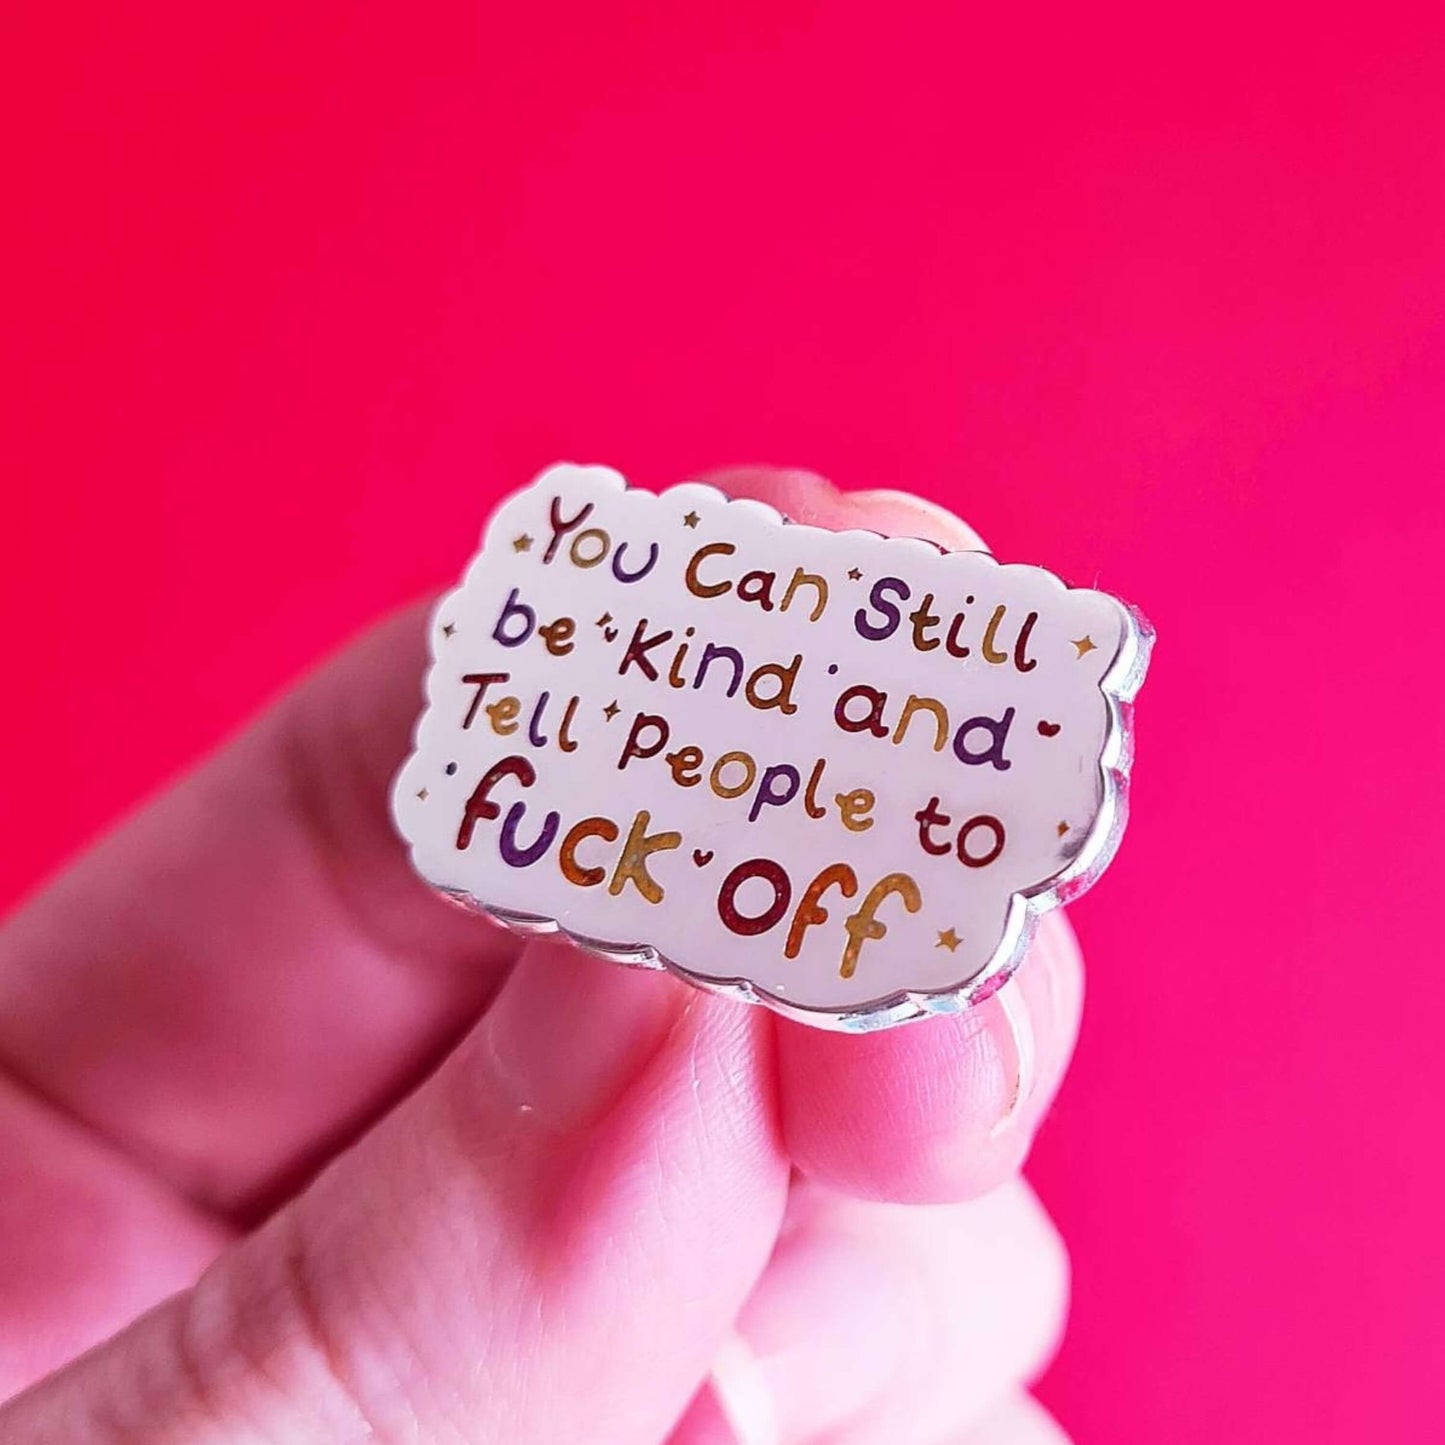 The You Can Still be Kind and Tell People to F**k Off Enamel Pin being held over a red background. The silver plated enamel pin has rainbow writing reading 'you can still be kind and tell people to fuck off' with multicoloured sparkles, dots and stars.